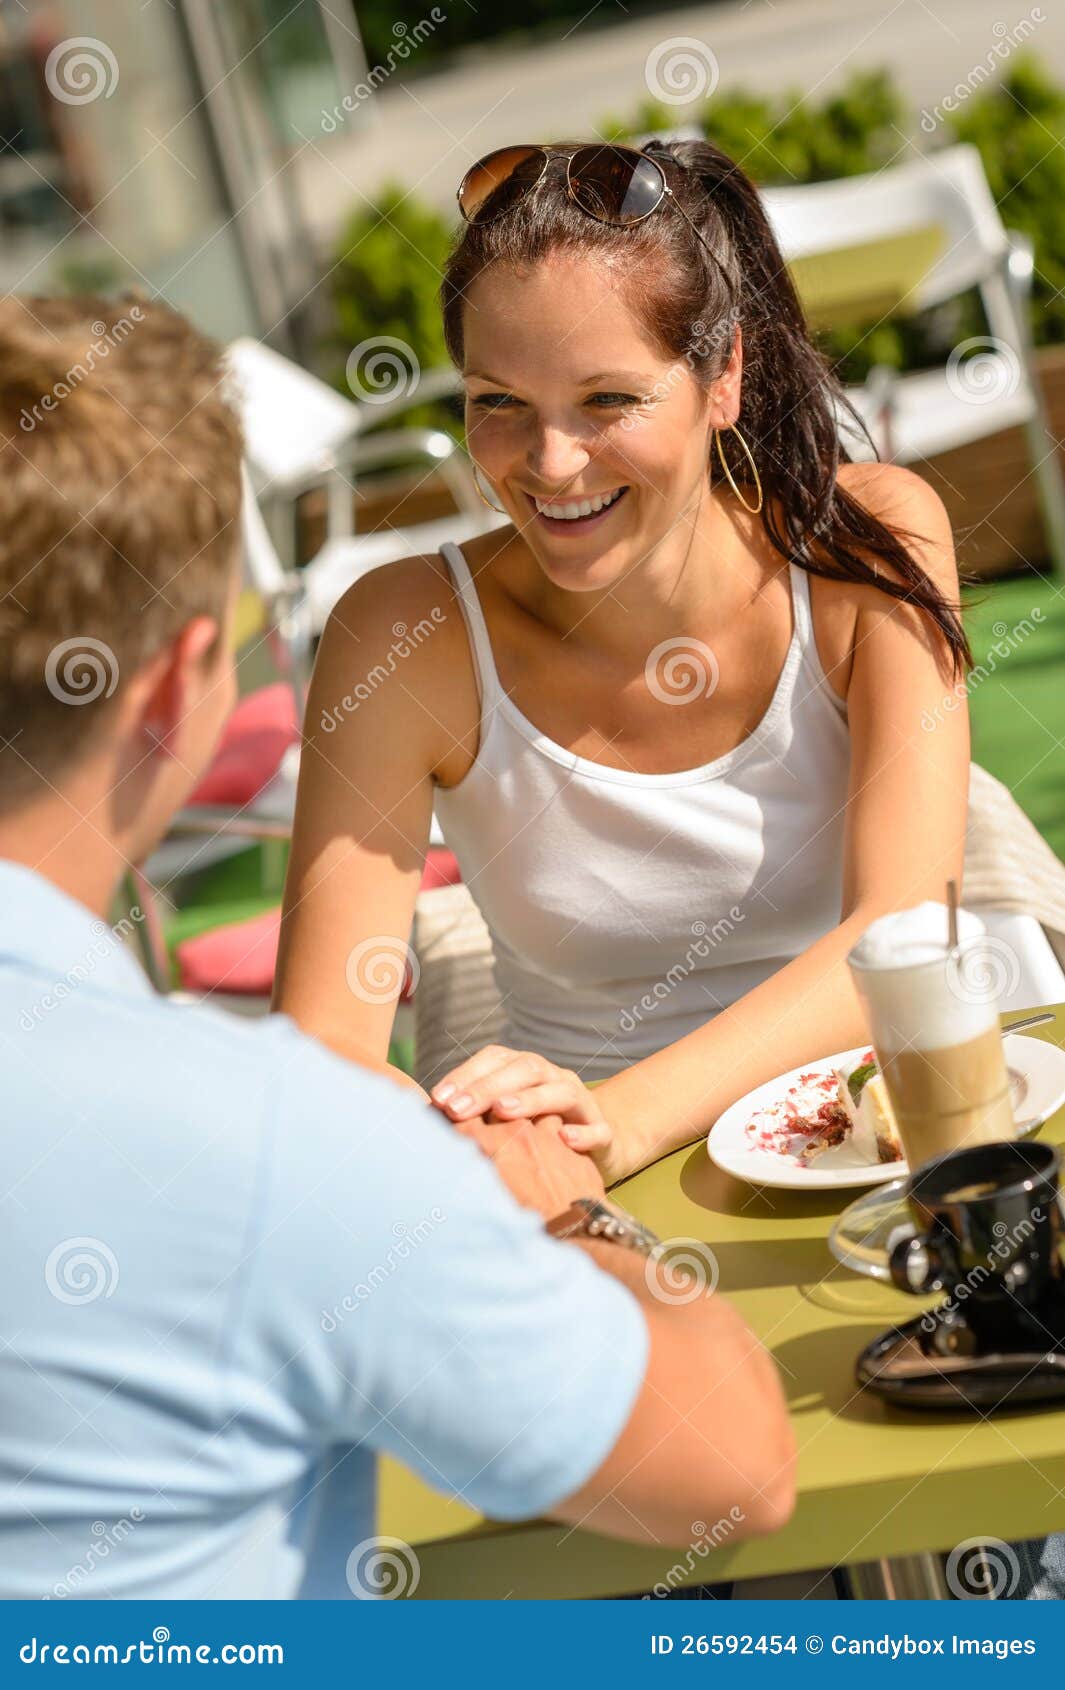 couple flirting holding hands at cafe bar